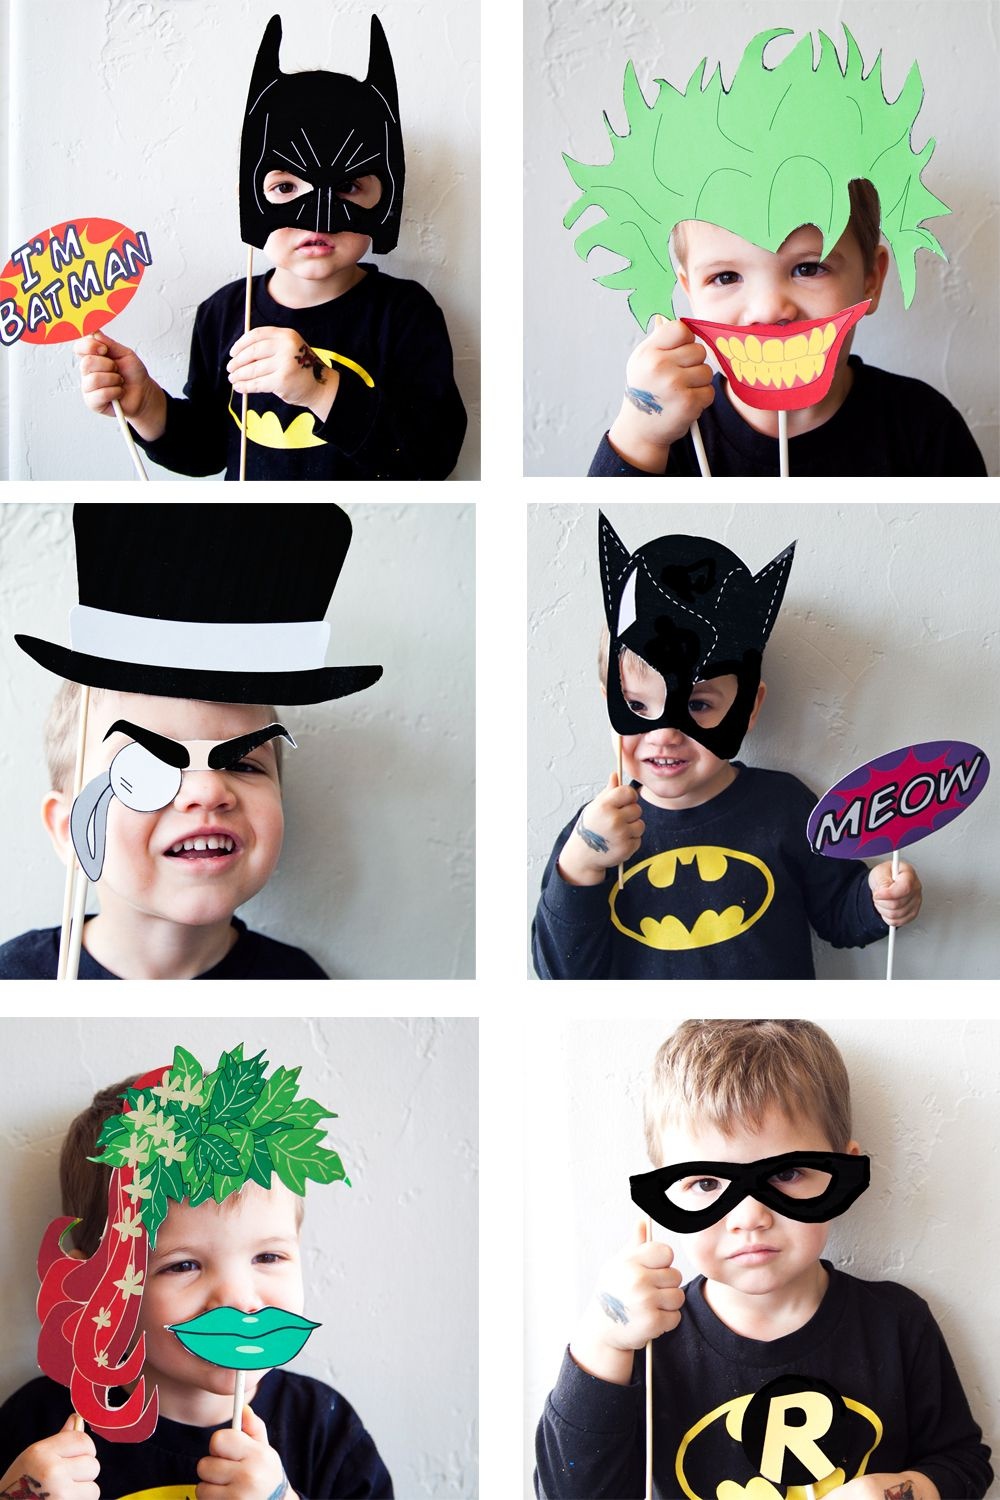 Batman Party With Free Photobooth Mask + Prop Printables | Party - Free Printable Superhero Photo Booth Props